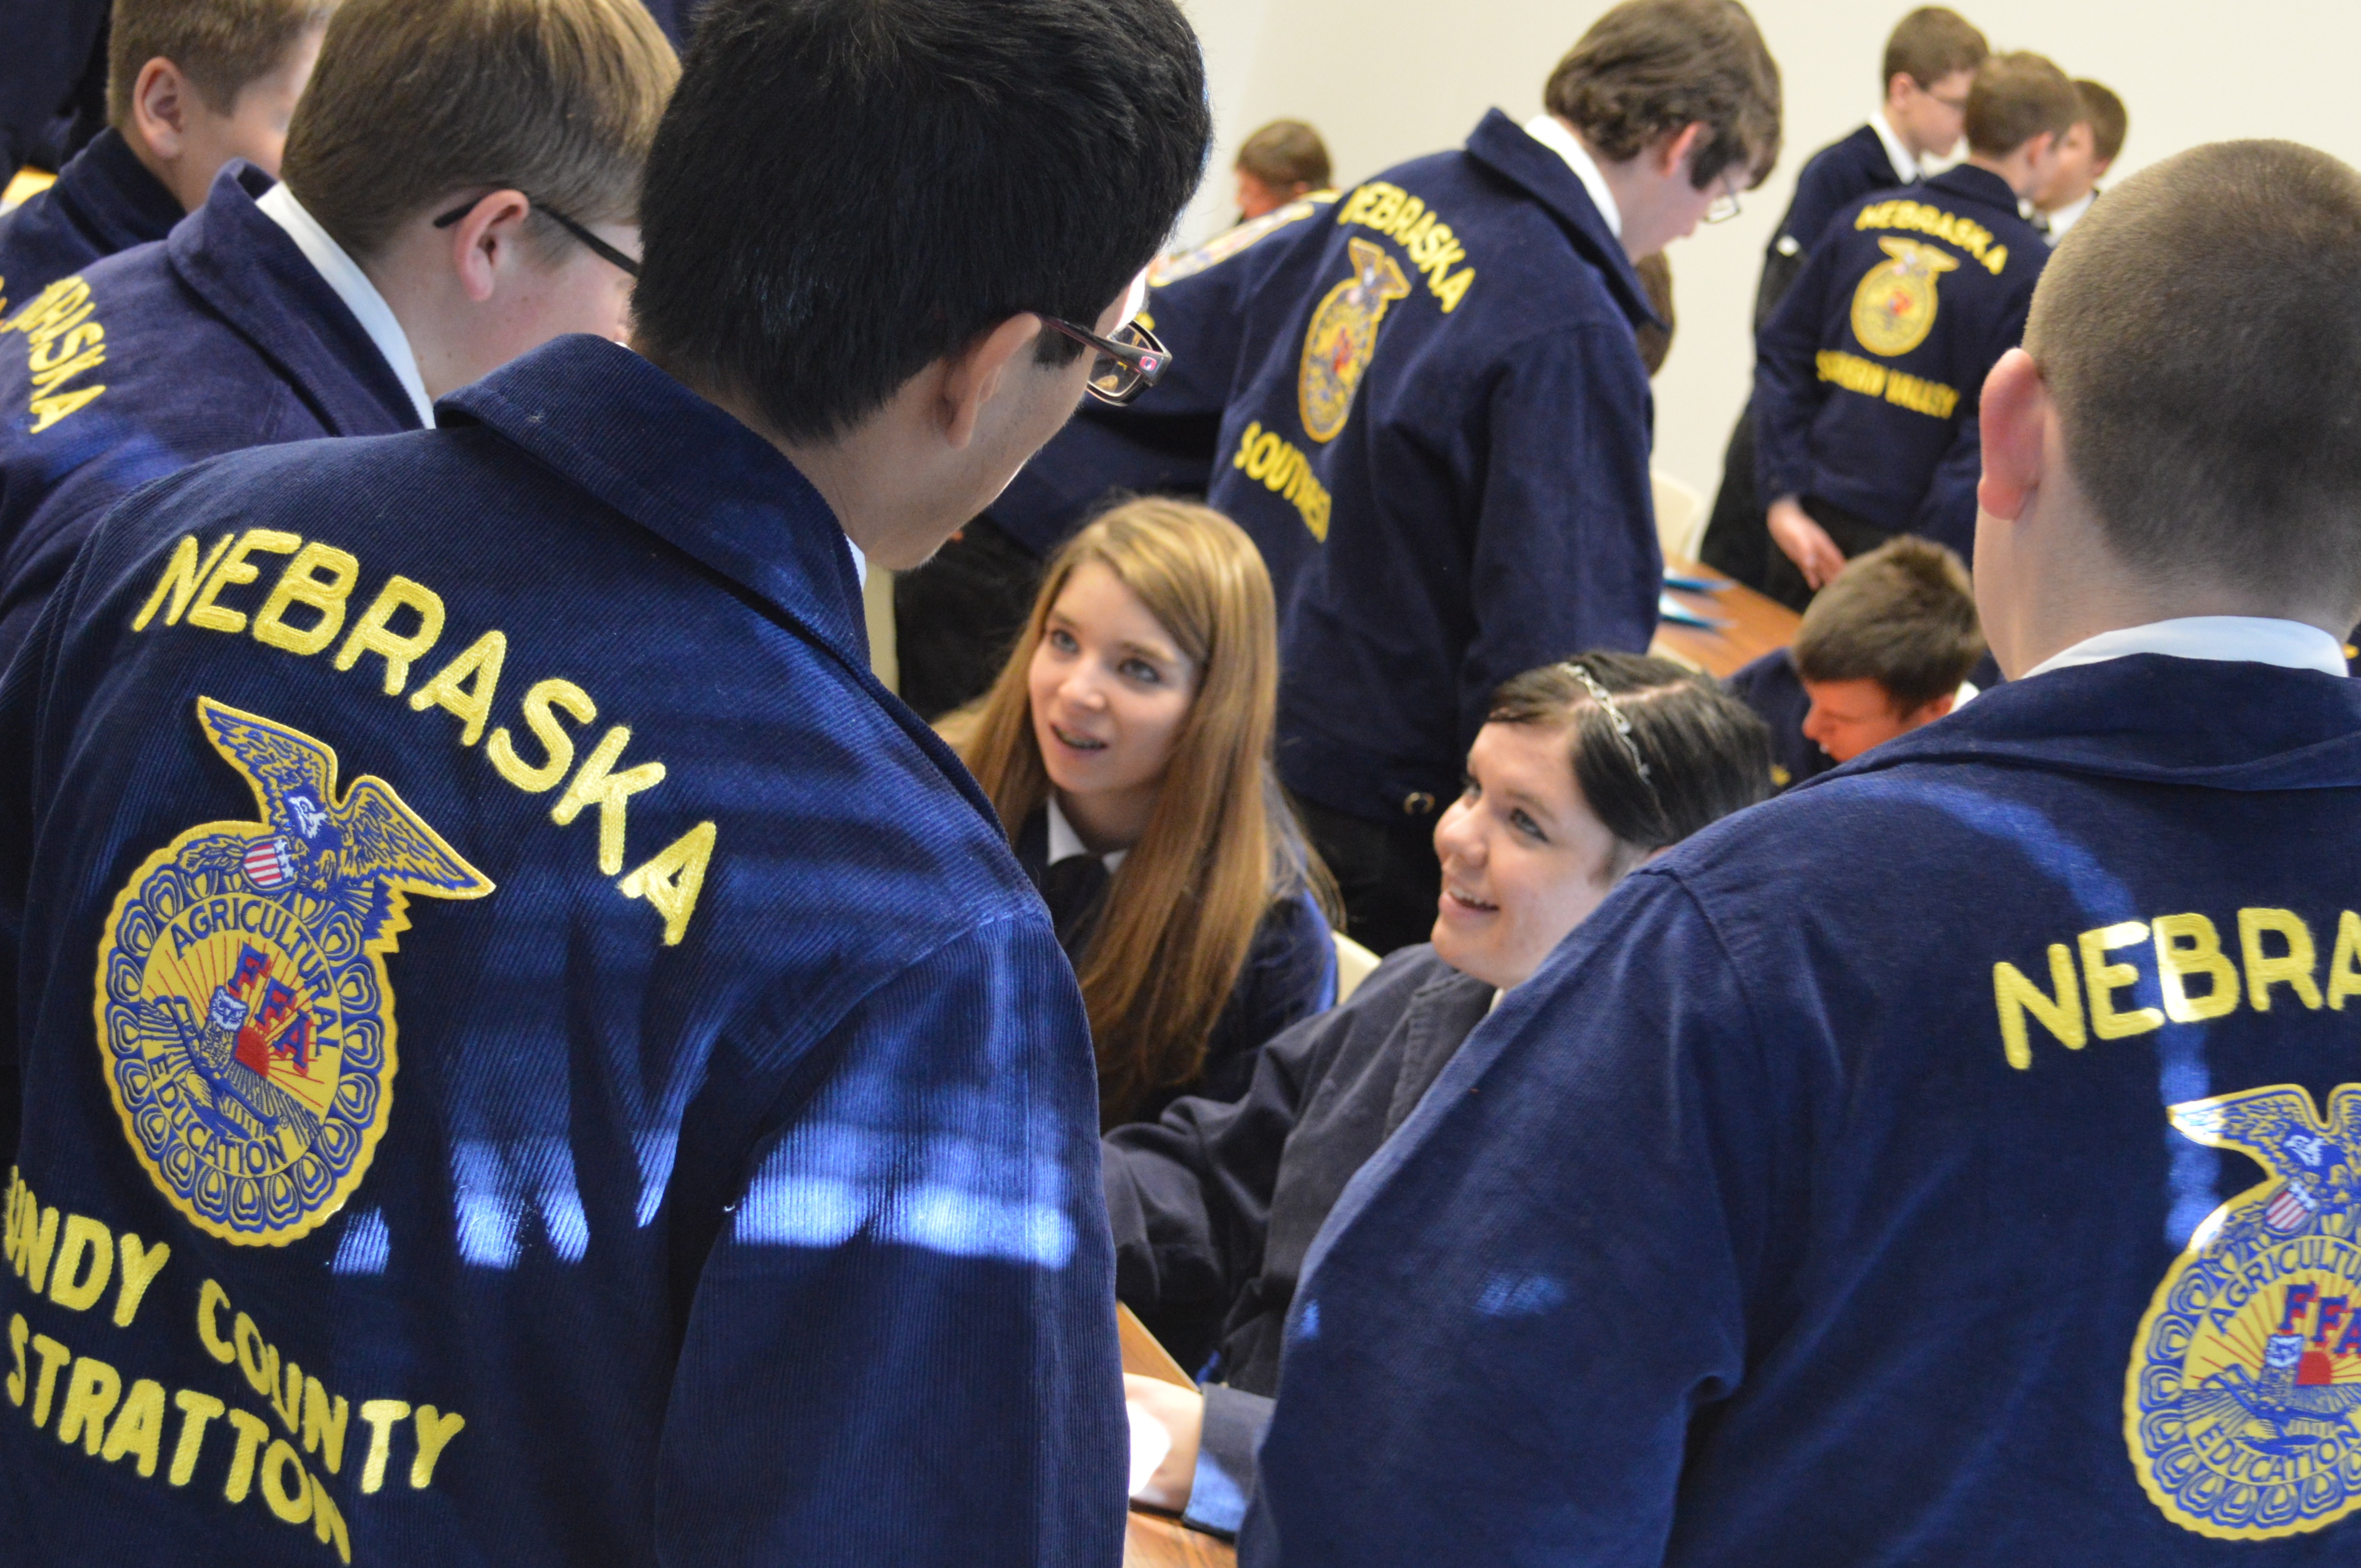 FFA members qualified for the 90th Annual Nebraska State FFA Convention through a series of district contests in 2017-2018. NCTA is a host site for hundreds of FFA members each year. (NCTA file photo)